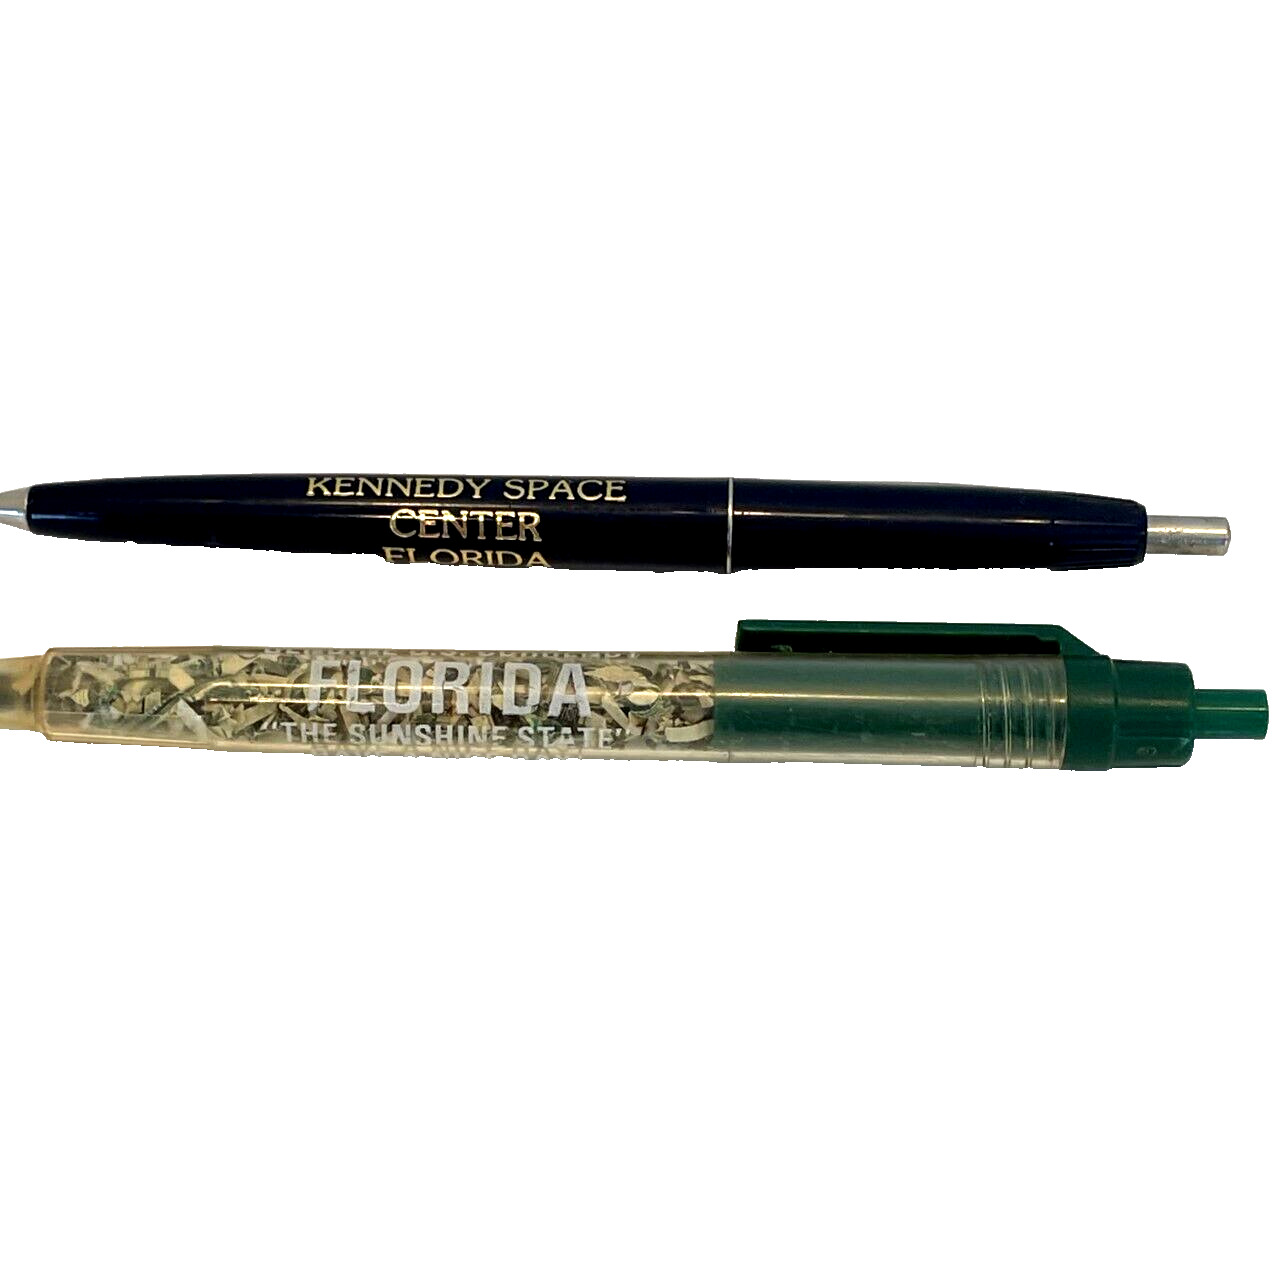 Pair of Florida Souviner Pens Kennedy Space Center & The Sunshine State